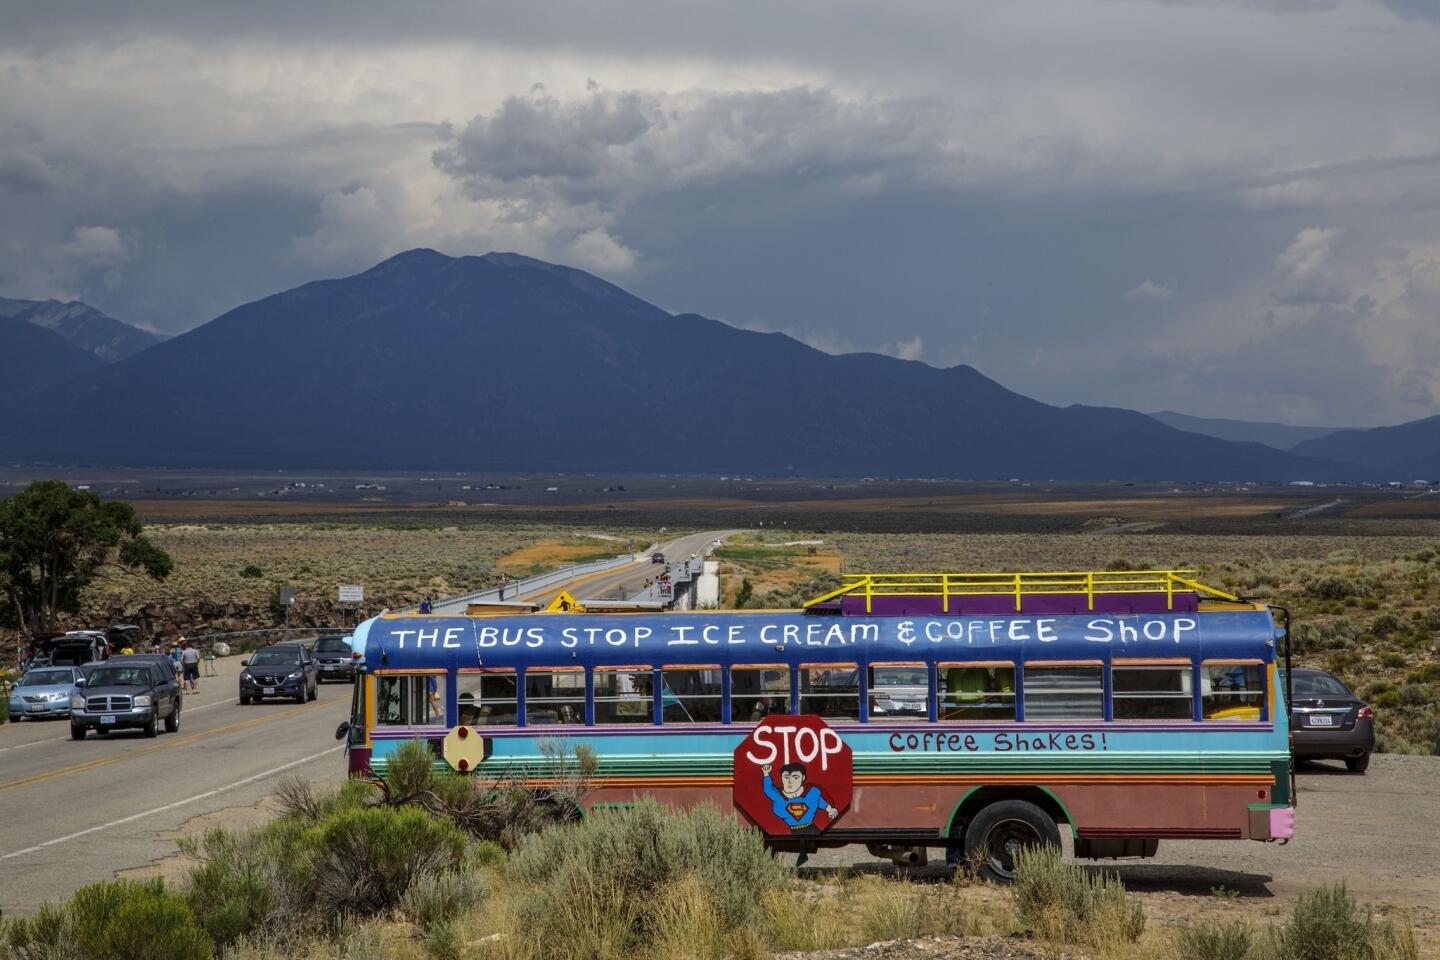 The Bus Stop Ice Cream & Coffee Shop sells goods by the bridge that crosses the Rio Grande Gorge in Taos. The New Mexico city has been an oasis for people looking to escape since the early 1900s.